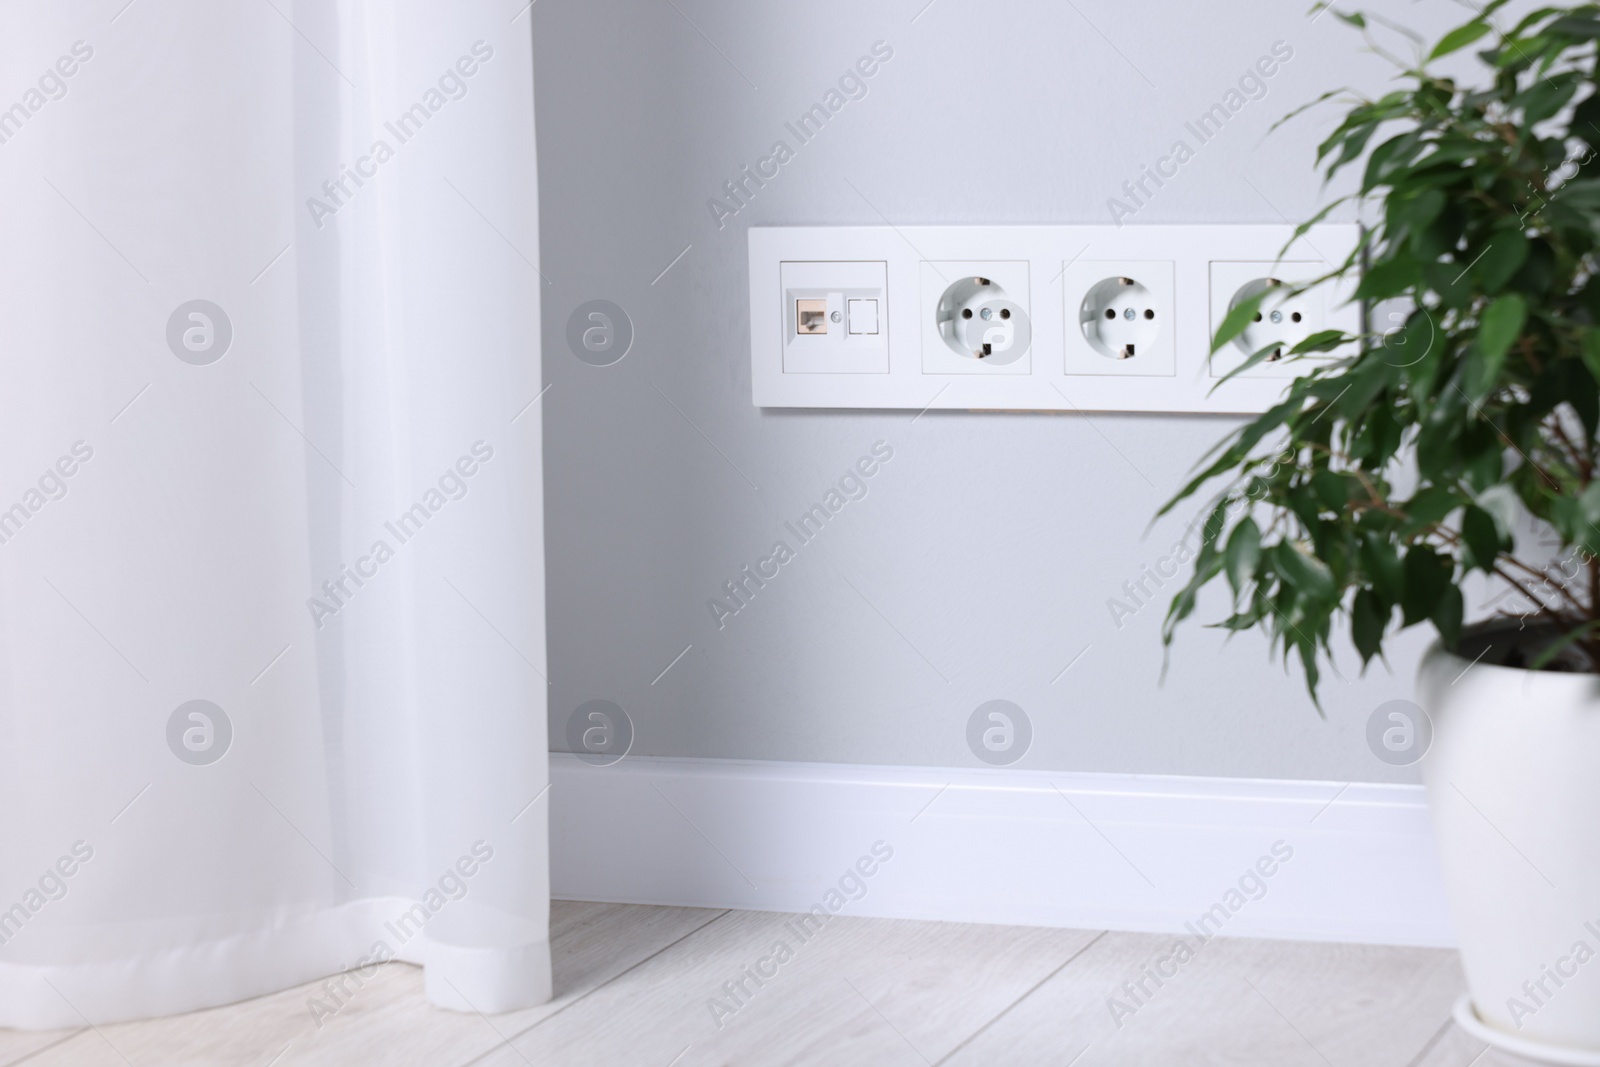 Photo of Electric power sockets on light grey wall indoors, space for text